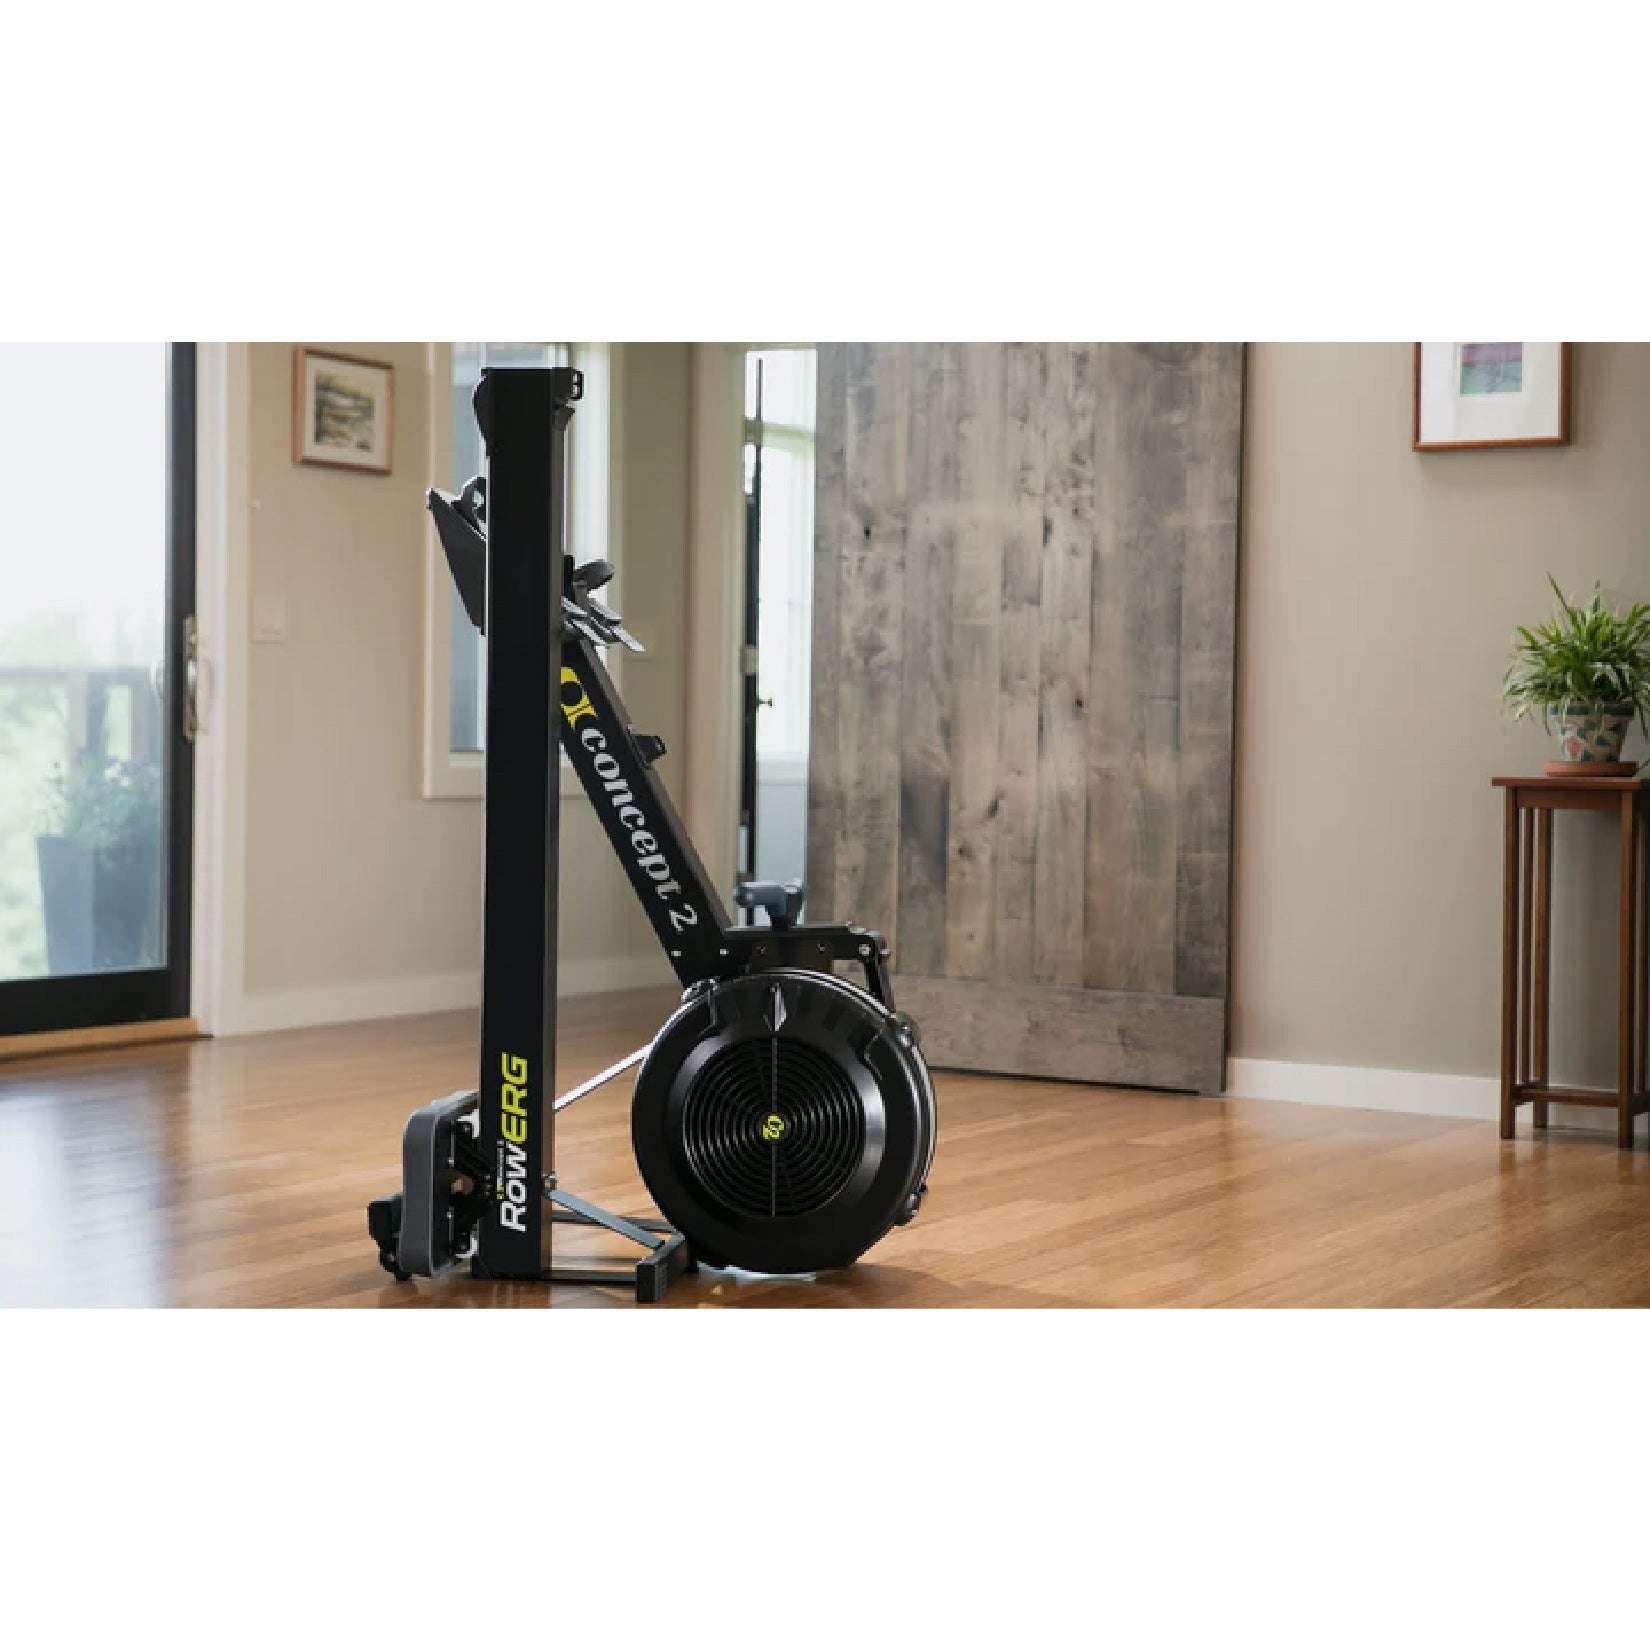 Concept 2 RowerErg Rower - Black (PM5 Console)-Chain Linked Rower-Concept 2-3